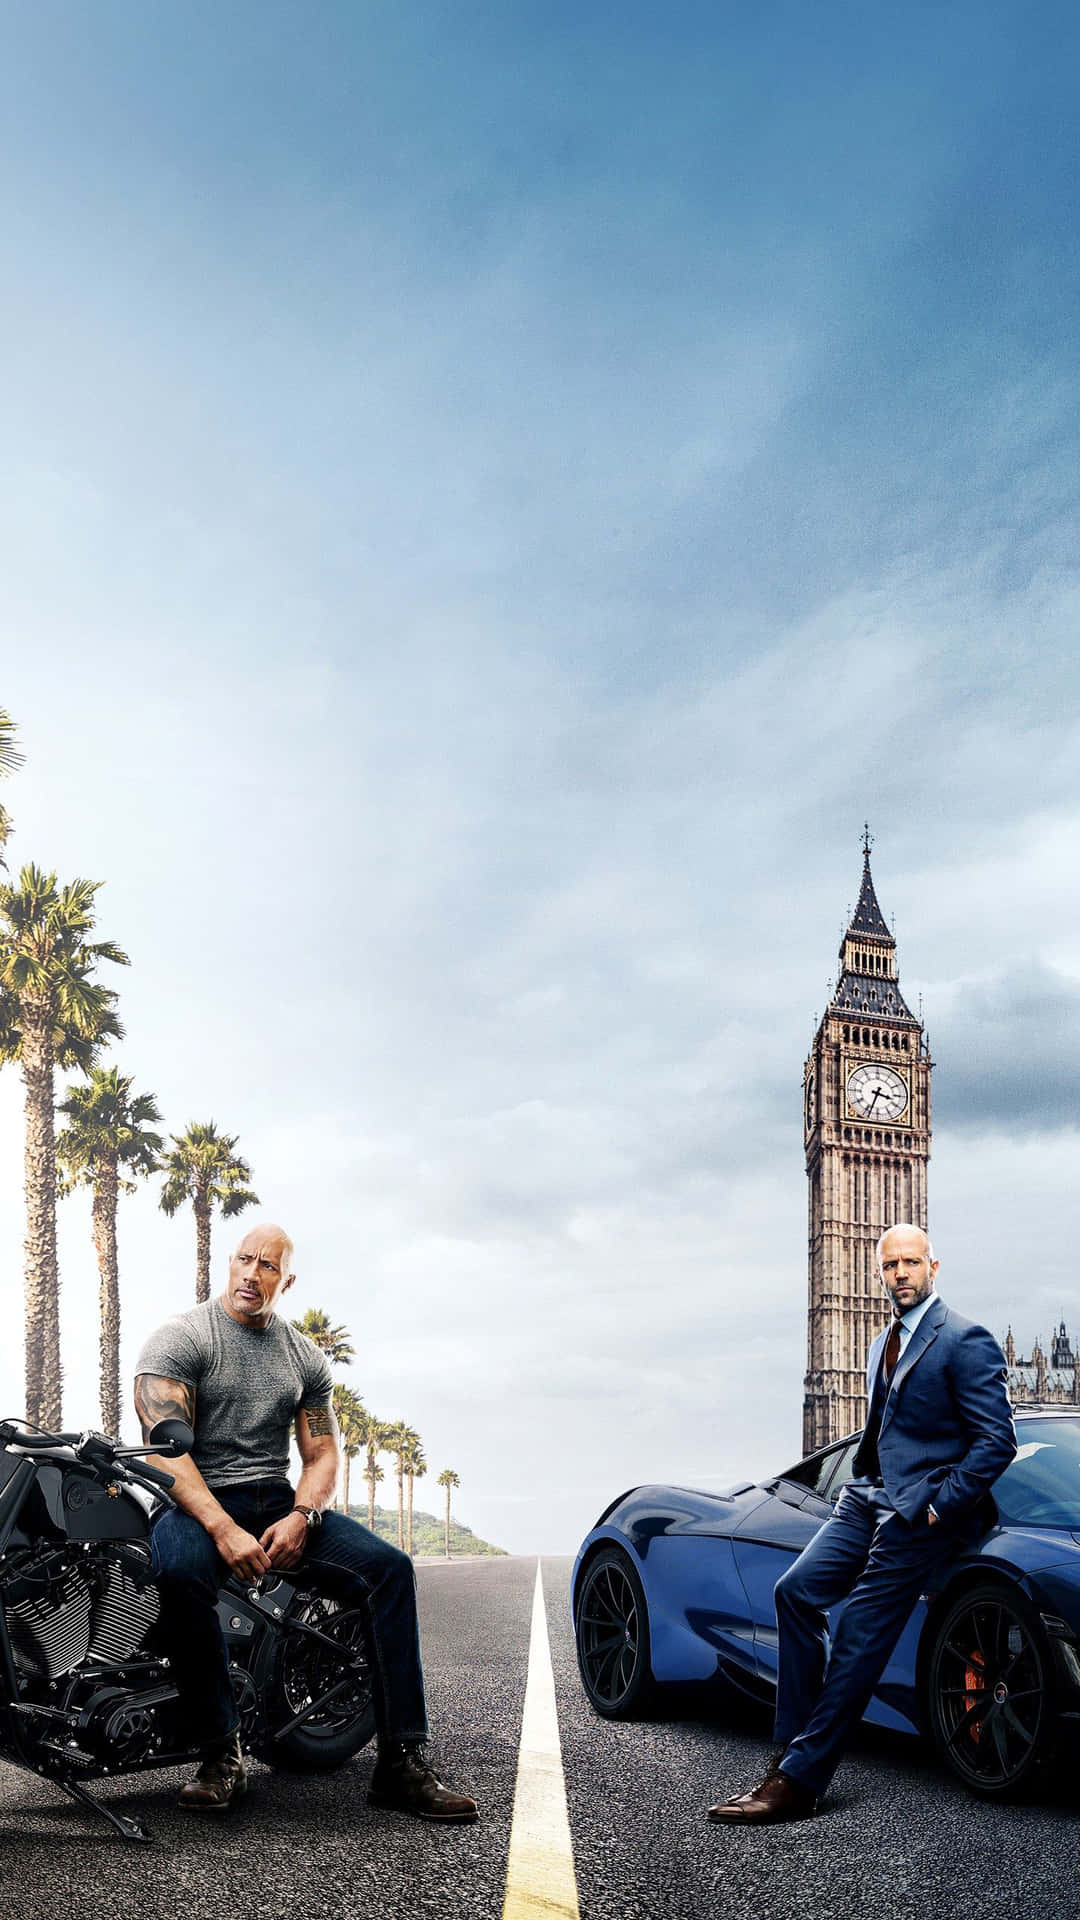 "The fast and the furious - now on your iPhone!" Wallpaper